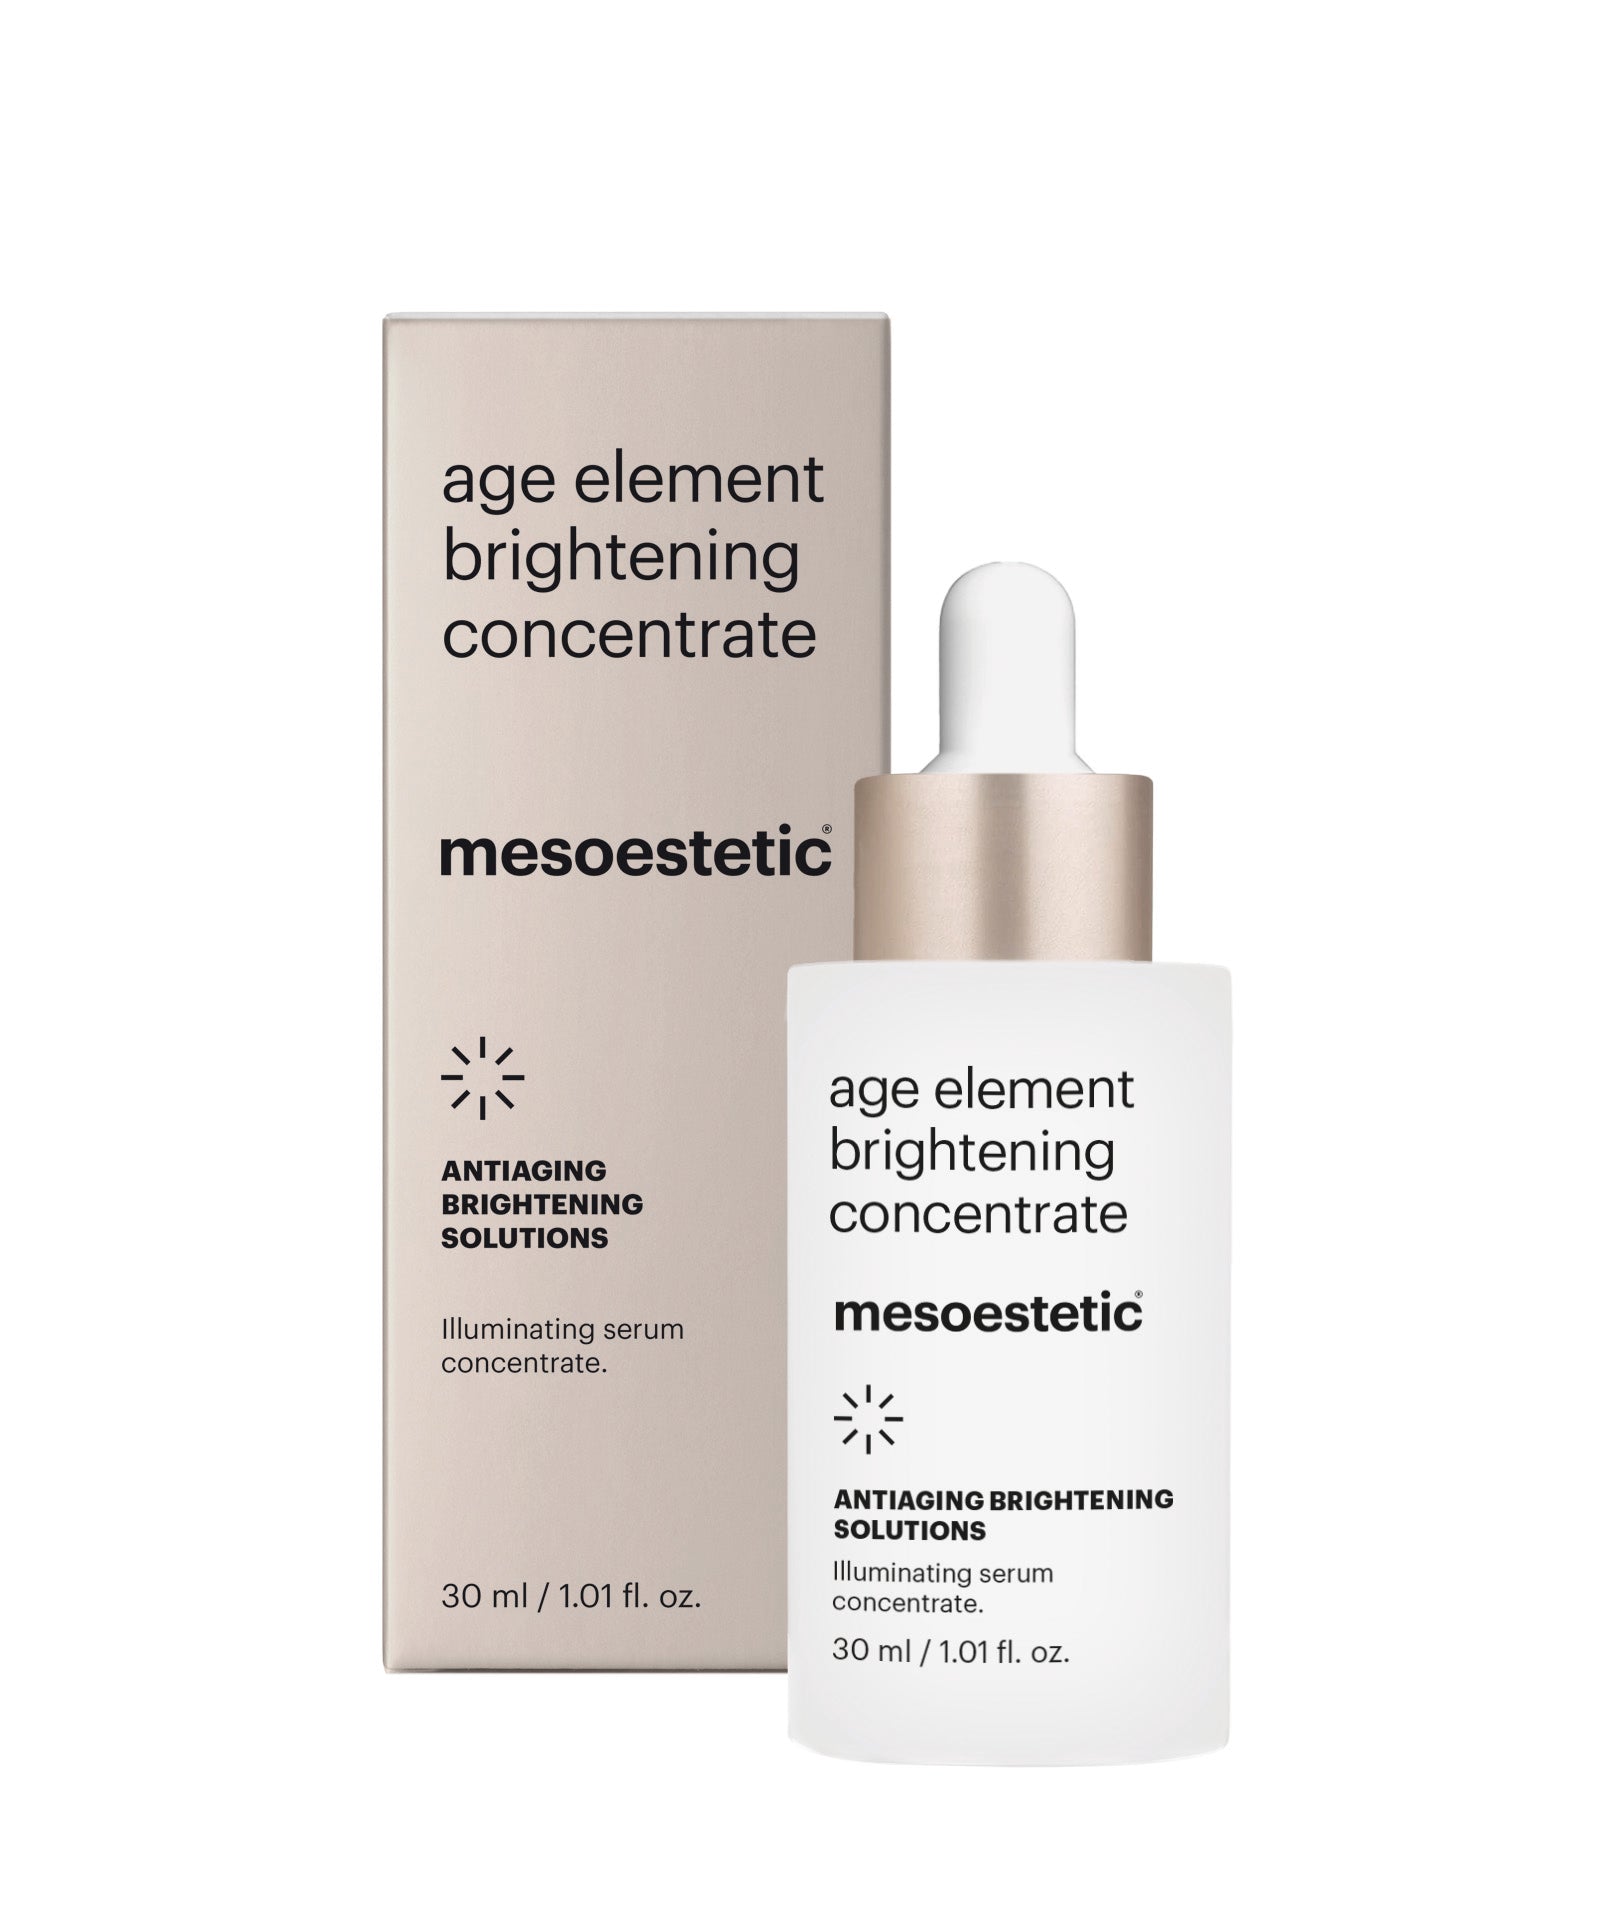 Mesoestetic age element brightening concentrate